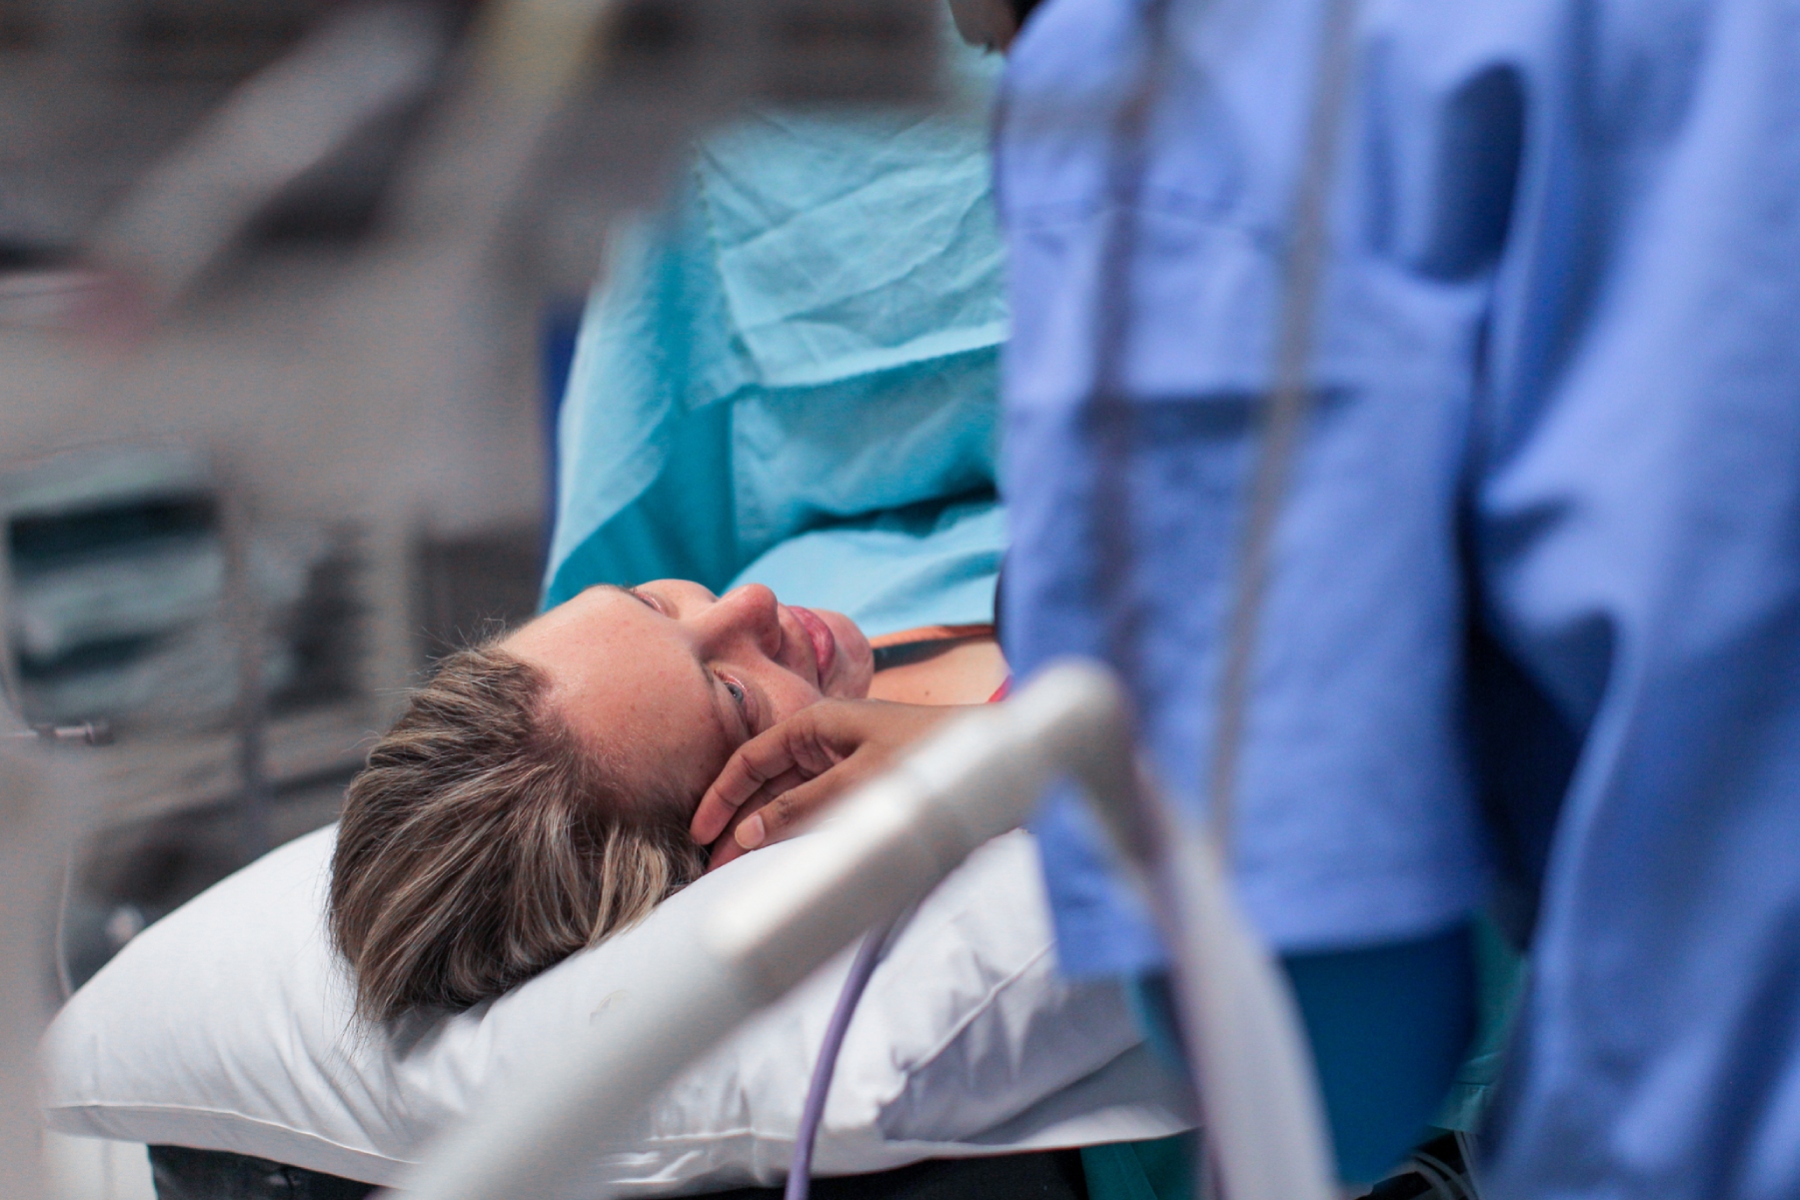 A pregnant woman laying on the operating table moments before having a cesarean section